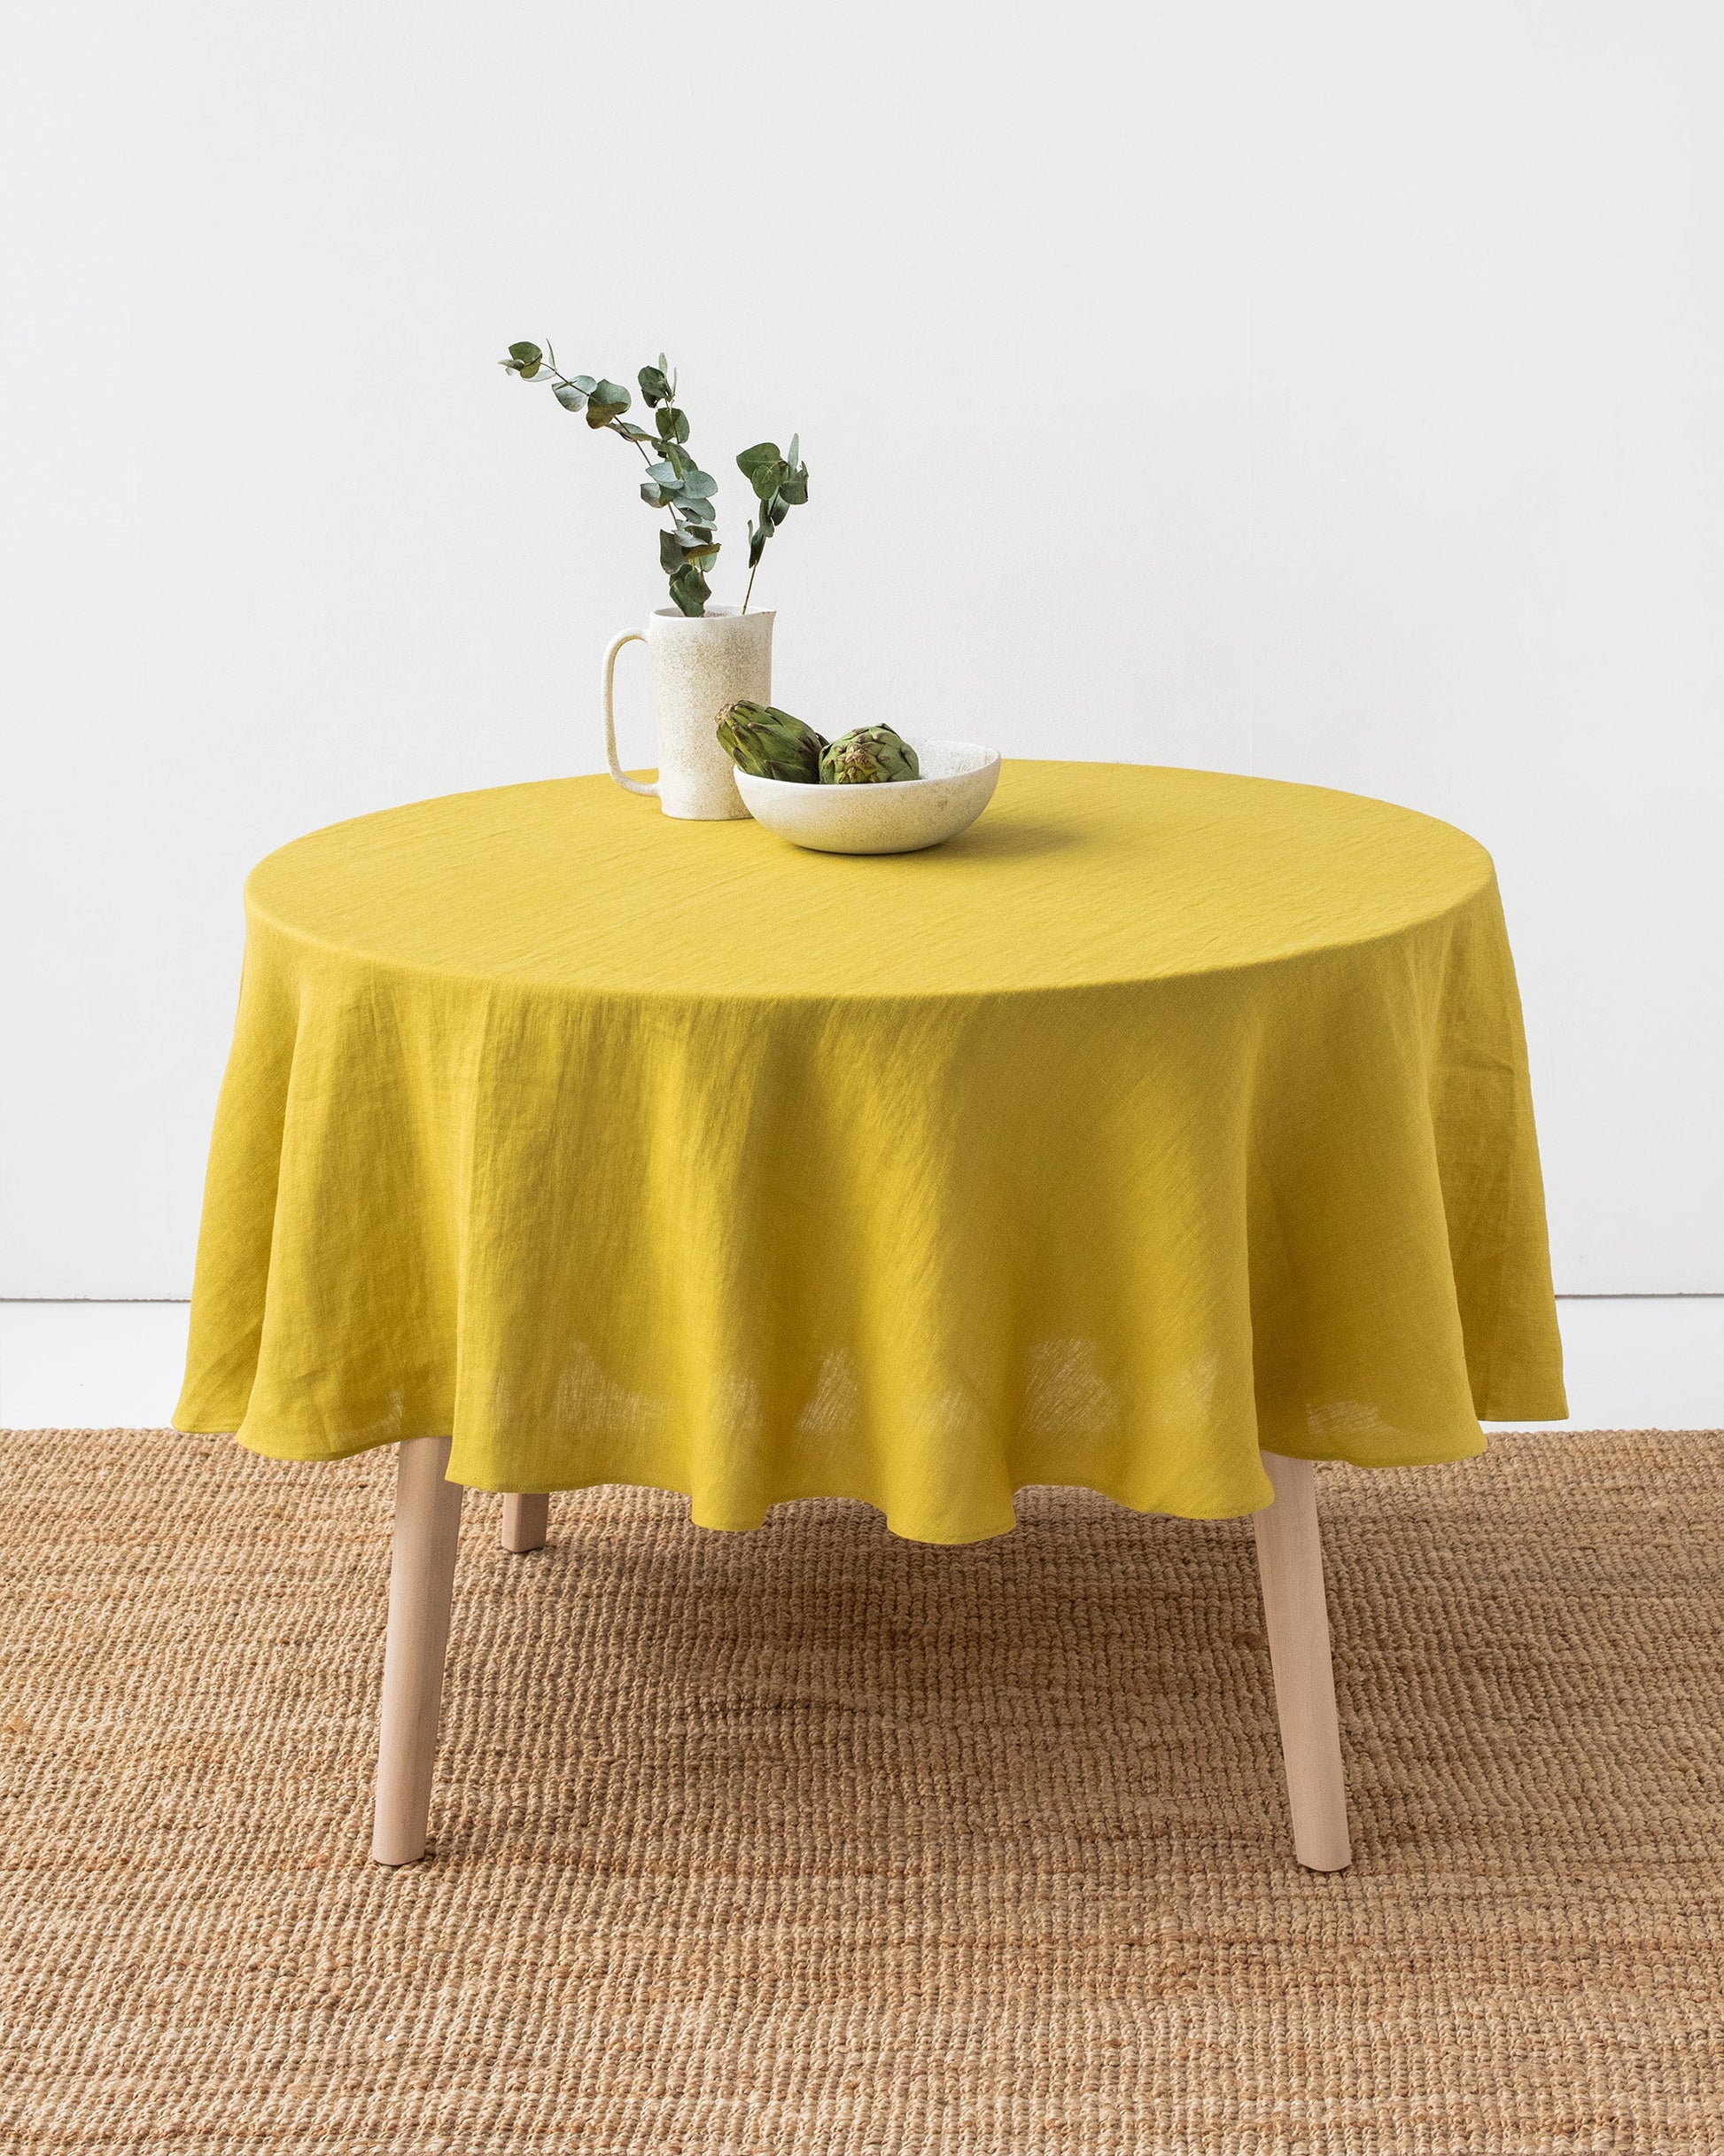 Custom size round linen tablecloth in Moss yellow - MagicLinen